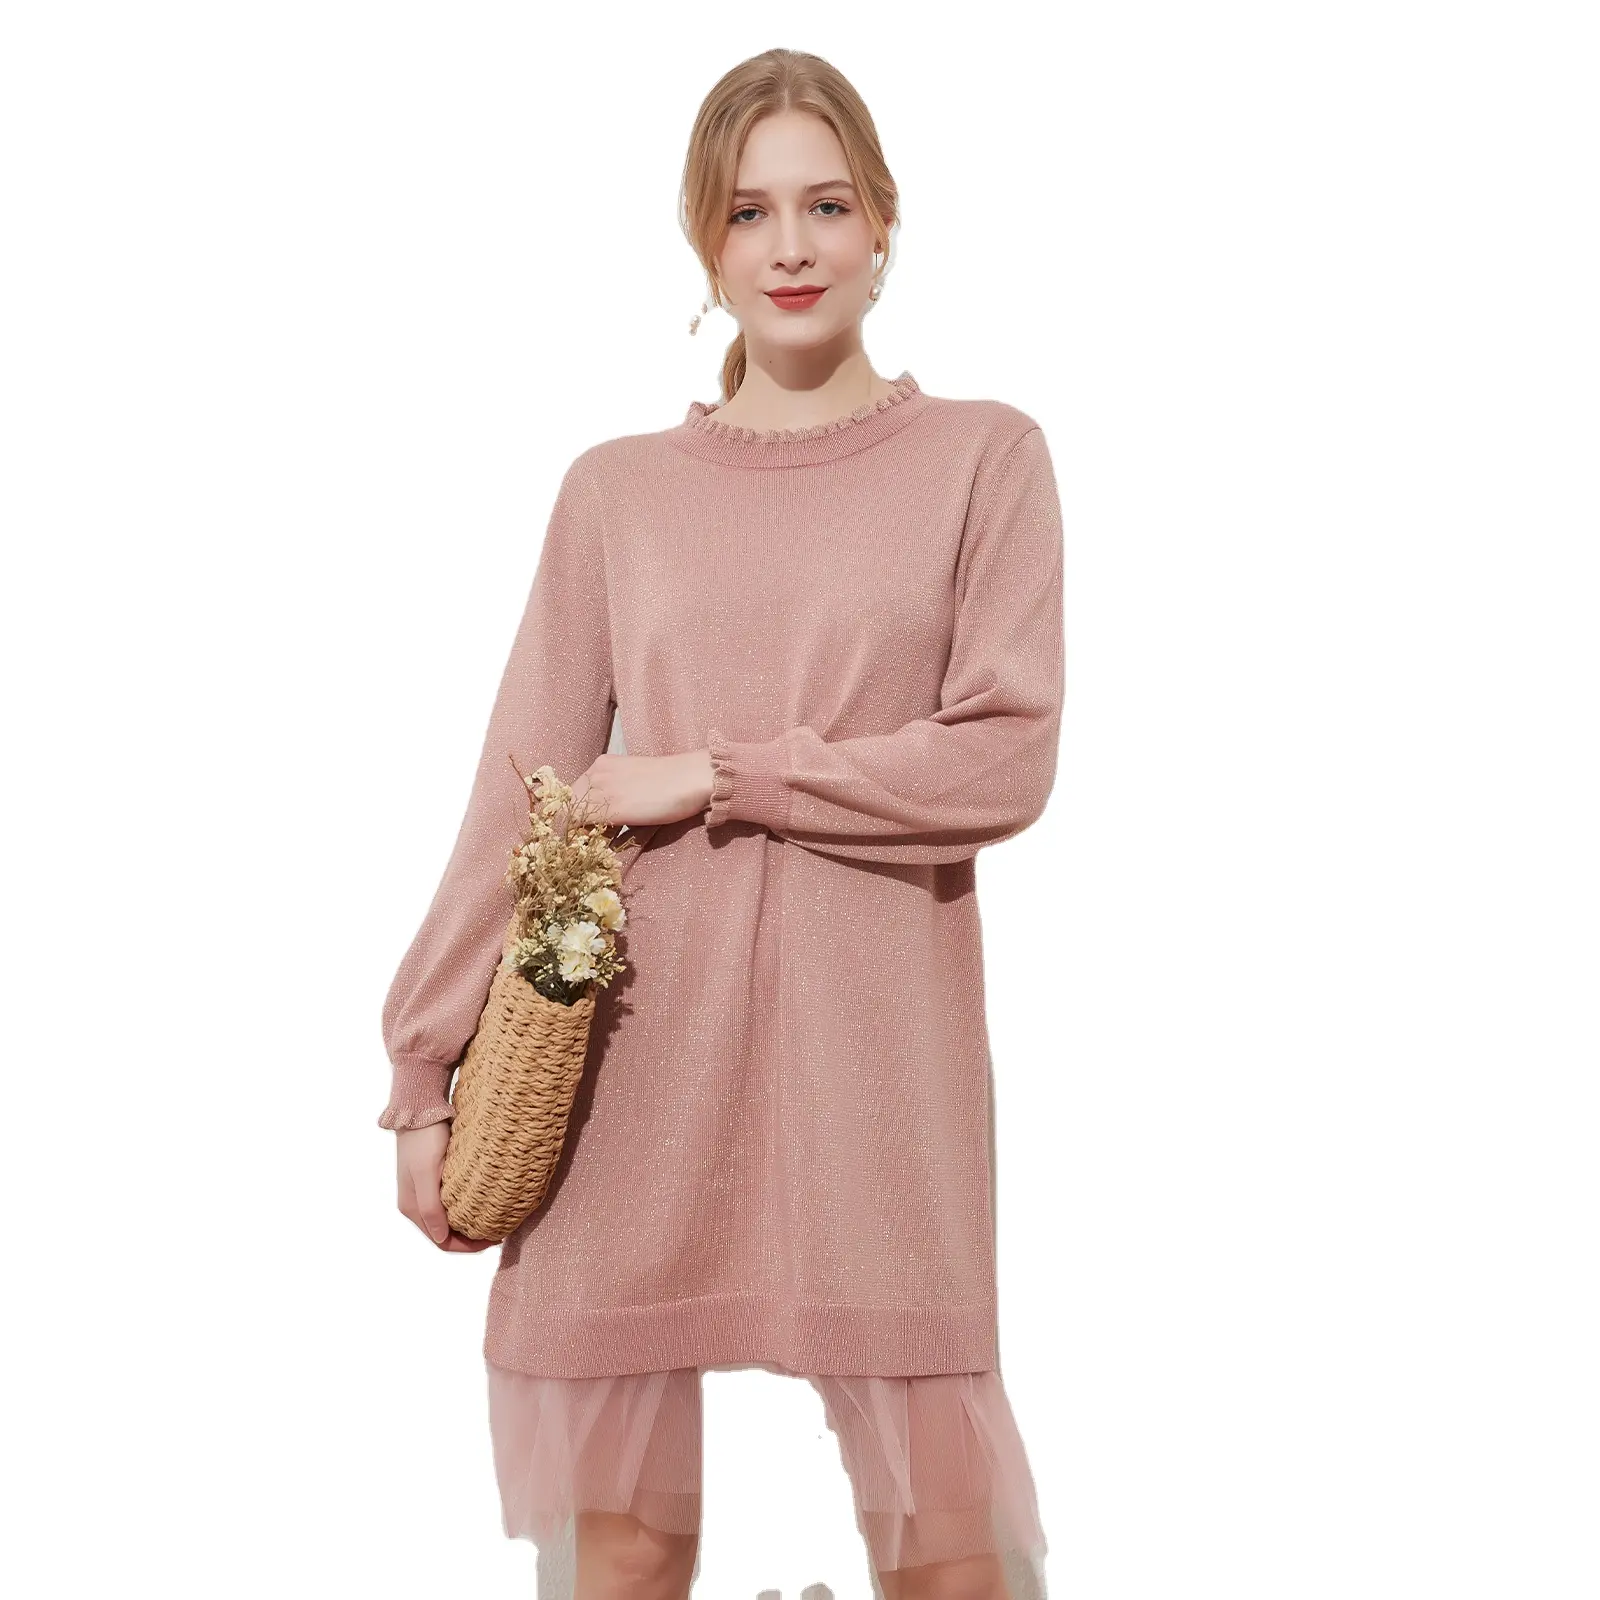 Fashion Autumn Winter Crew Neck Solid Thickened Womens Pullover Sweaters Knitwear with Lace Dress for Ladies/Women/Girl